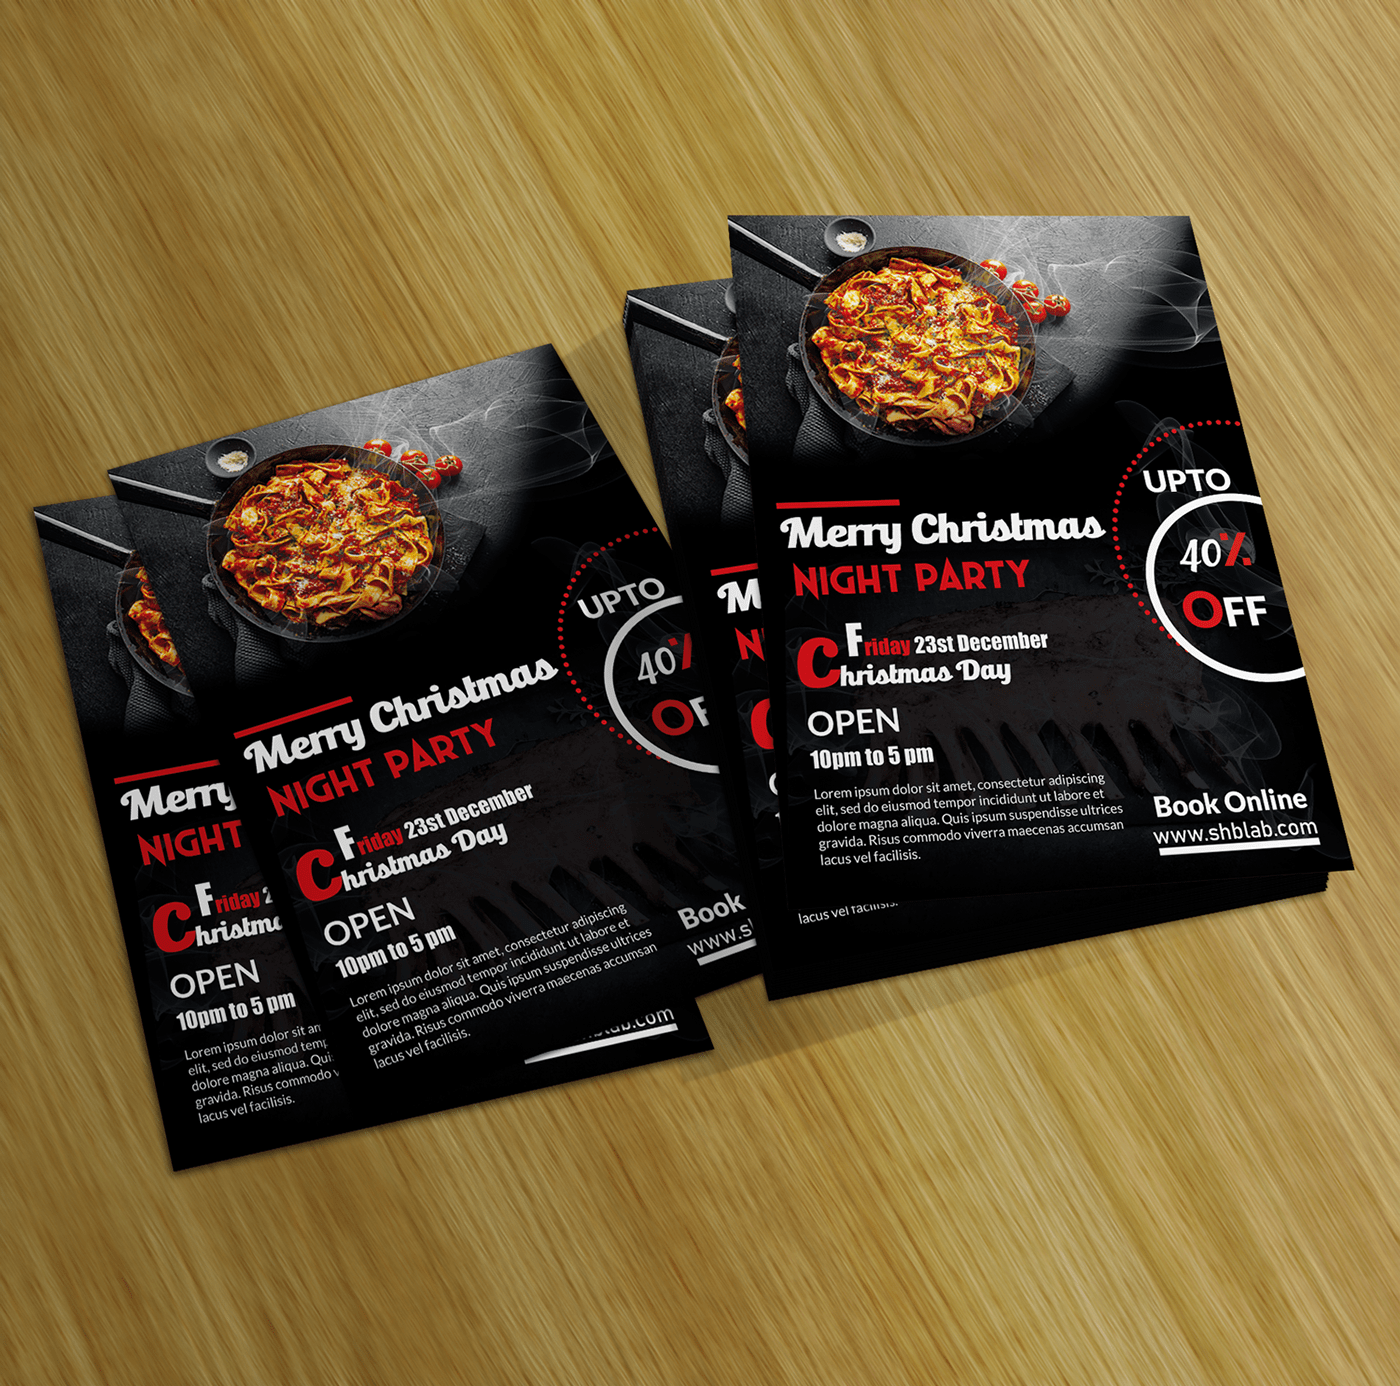 Bappy christmas party Flyer Design graphics design shb SHbappy SHBappy21 shbdesign shblab